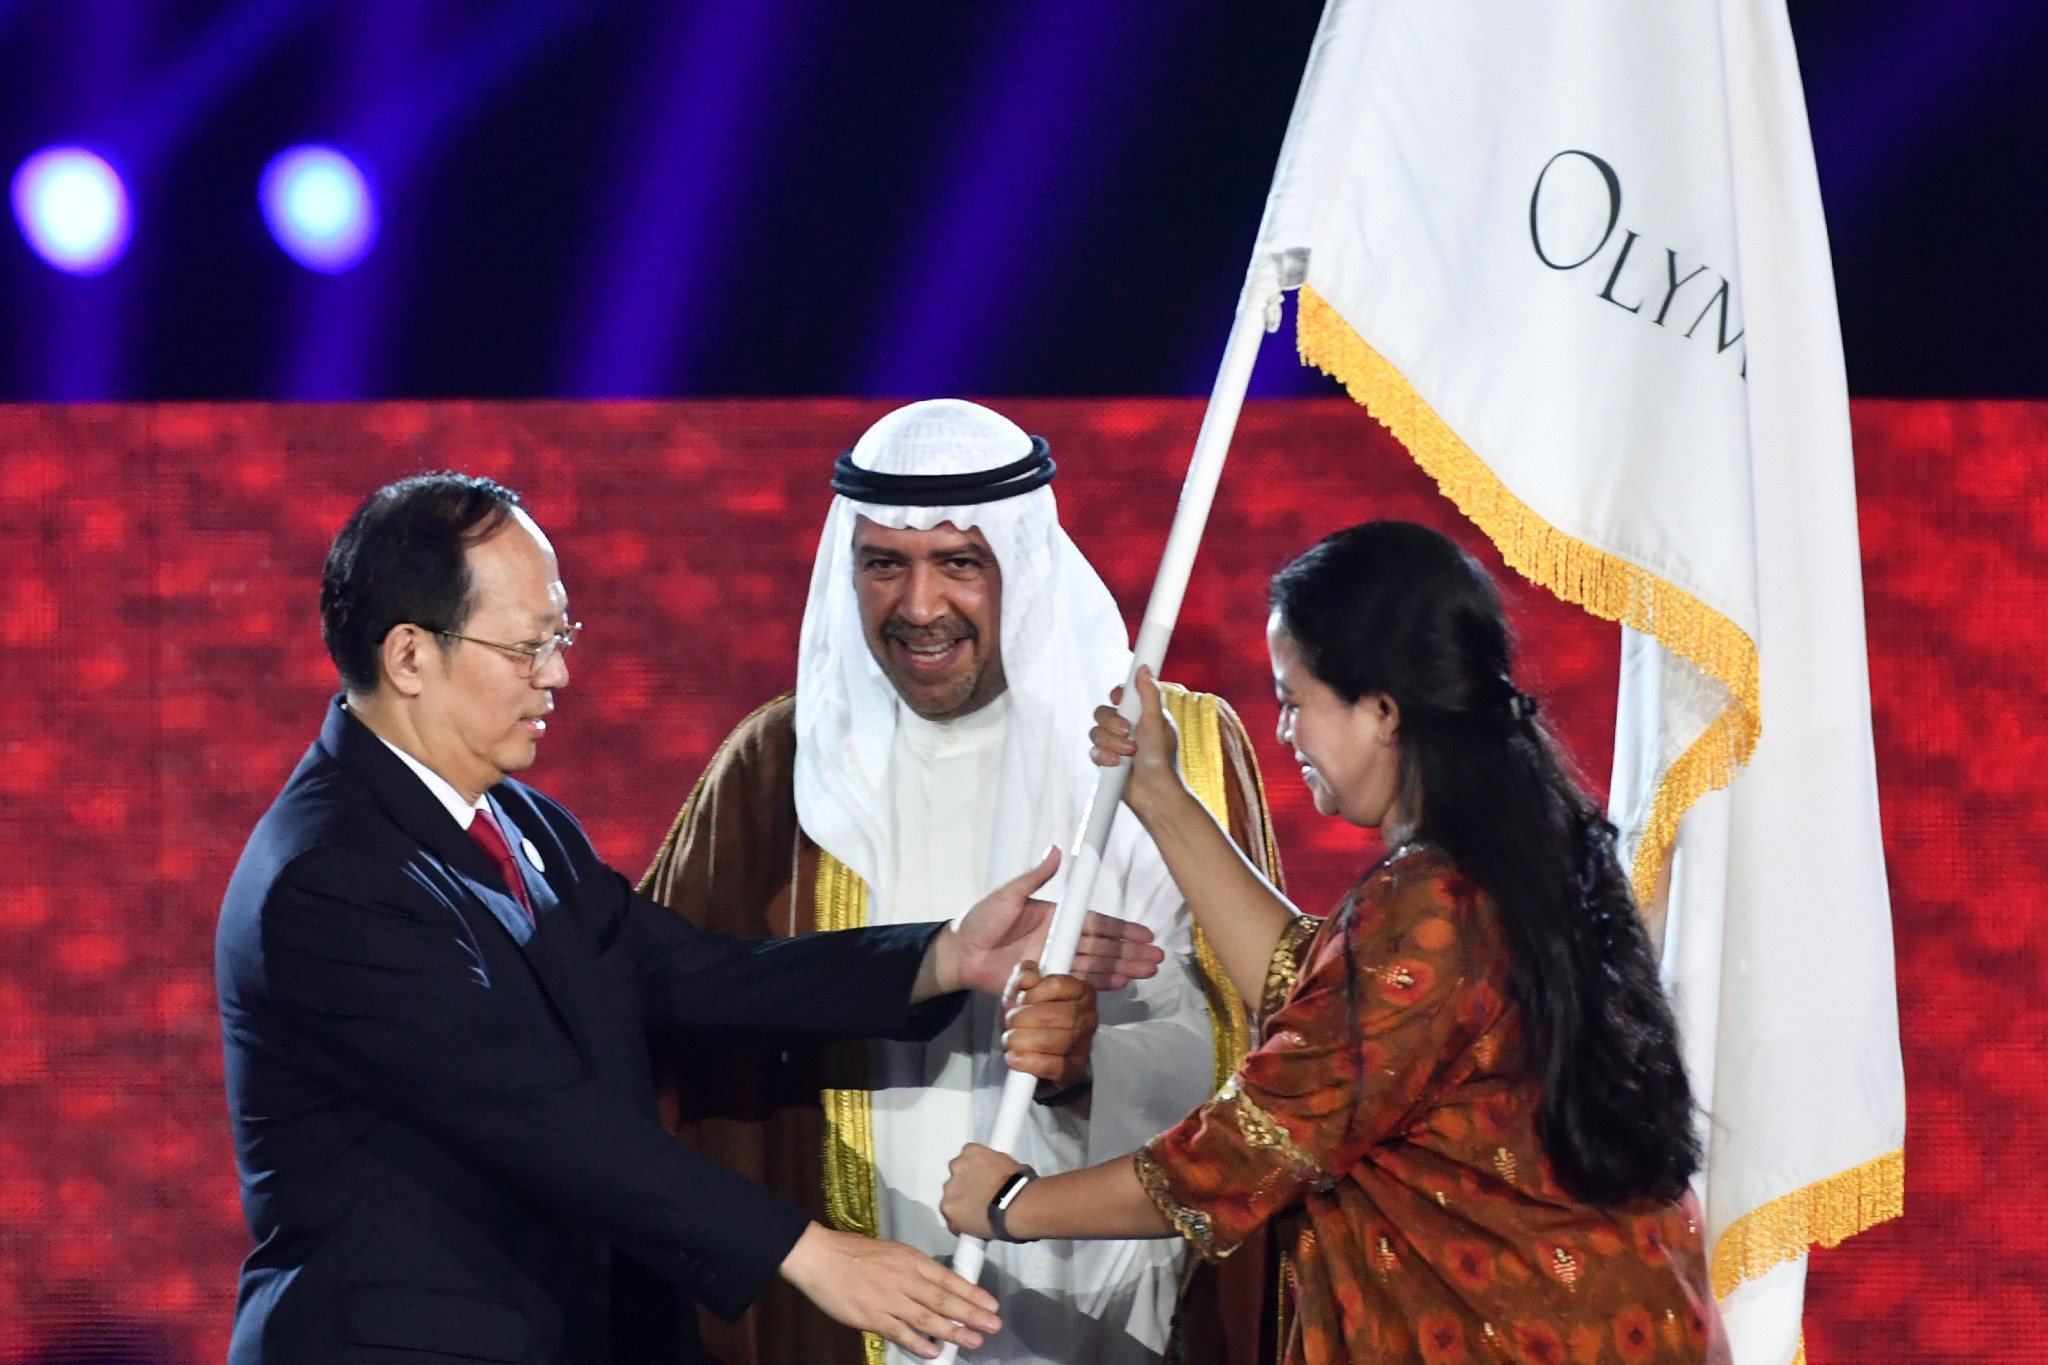 He was also on hand to participate in the OCA flag handover ceremony as attention turned to the 2022 Asian Games in Hangzhou in China ©Getty Images